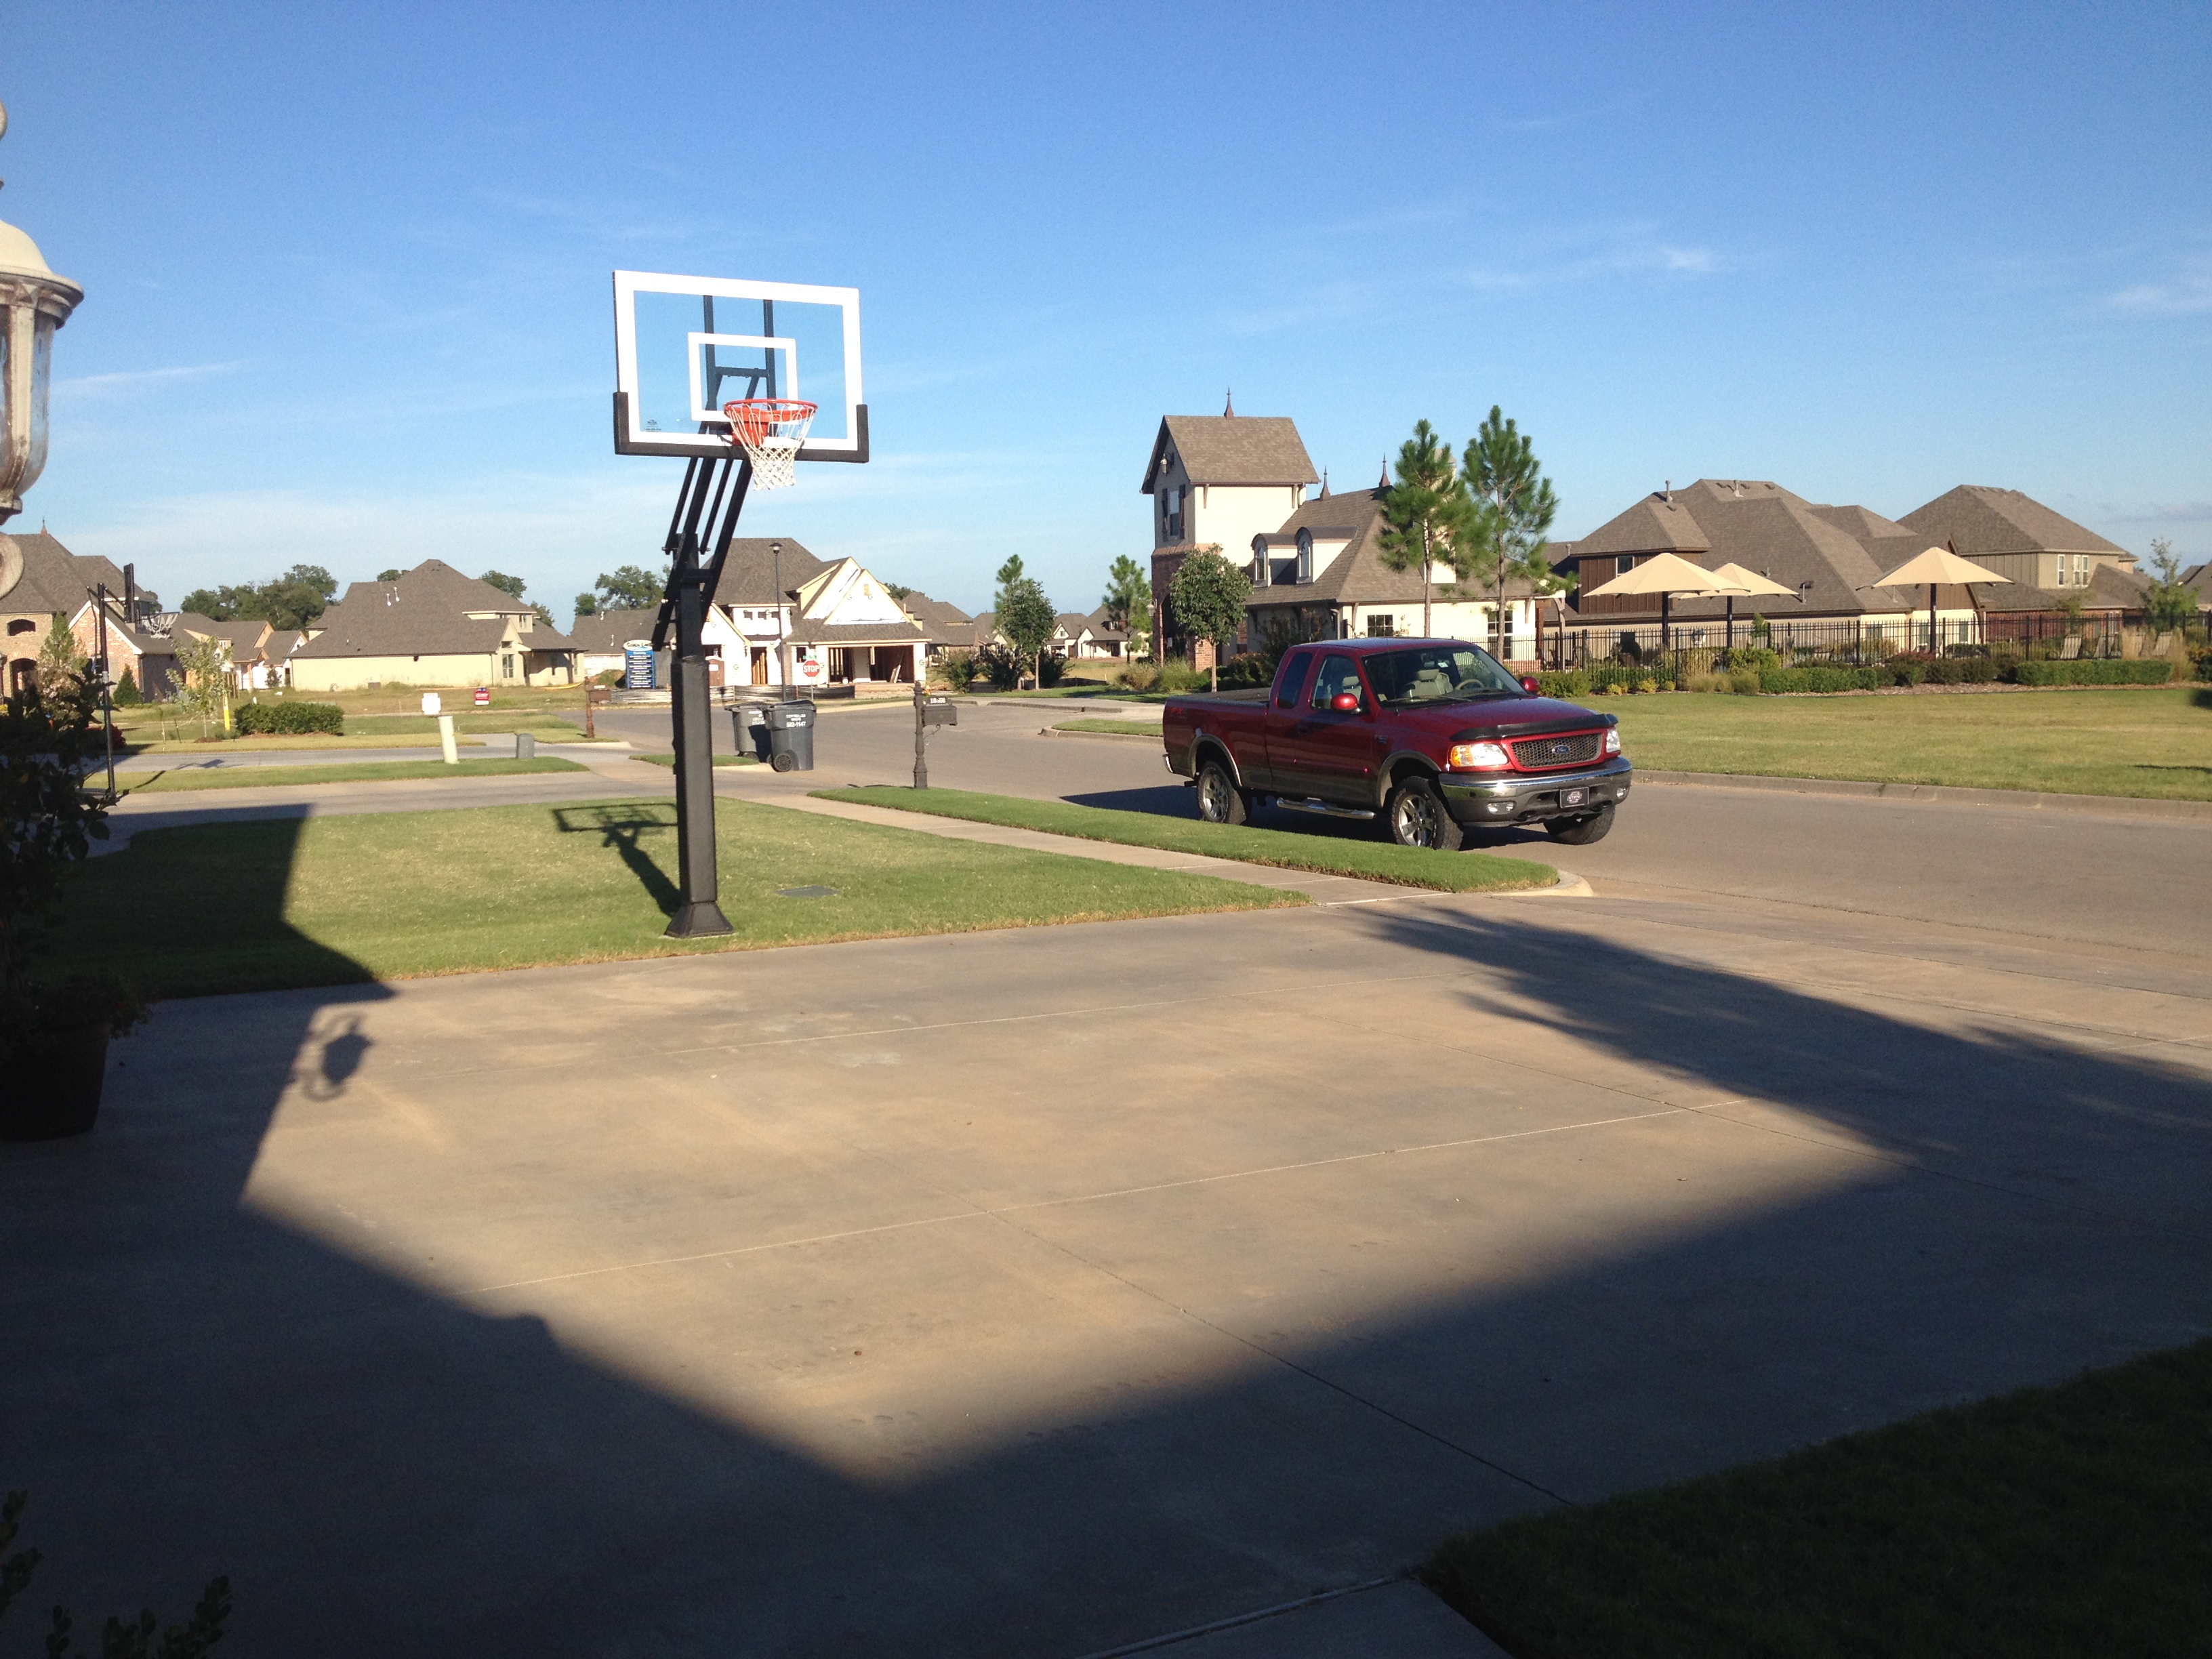 It is a beautiful day to go outside and play some basketball with your family or neighbors.